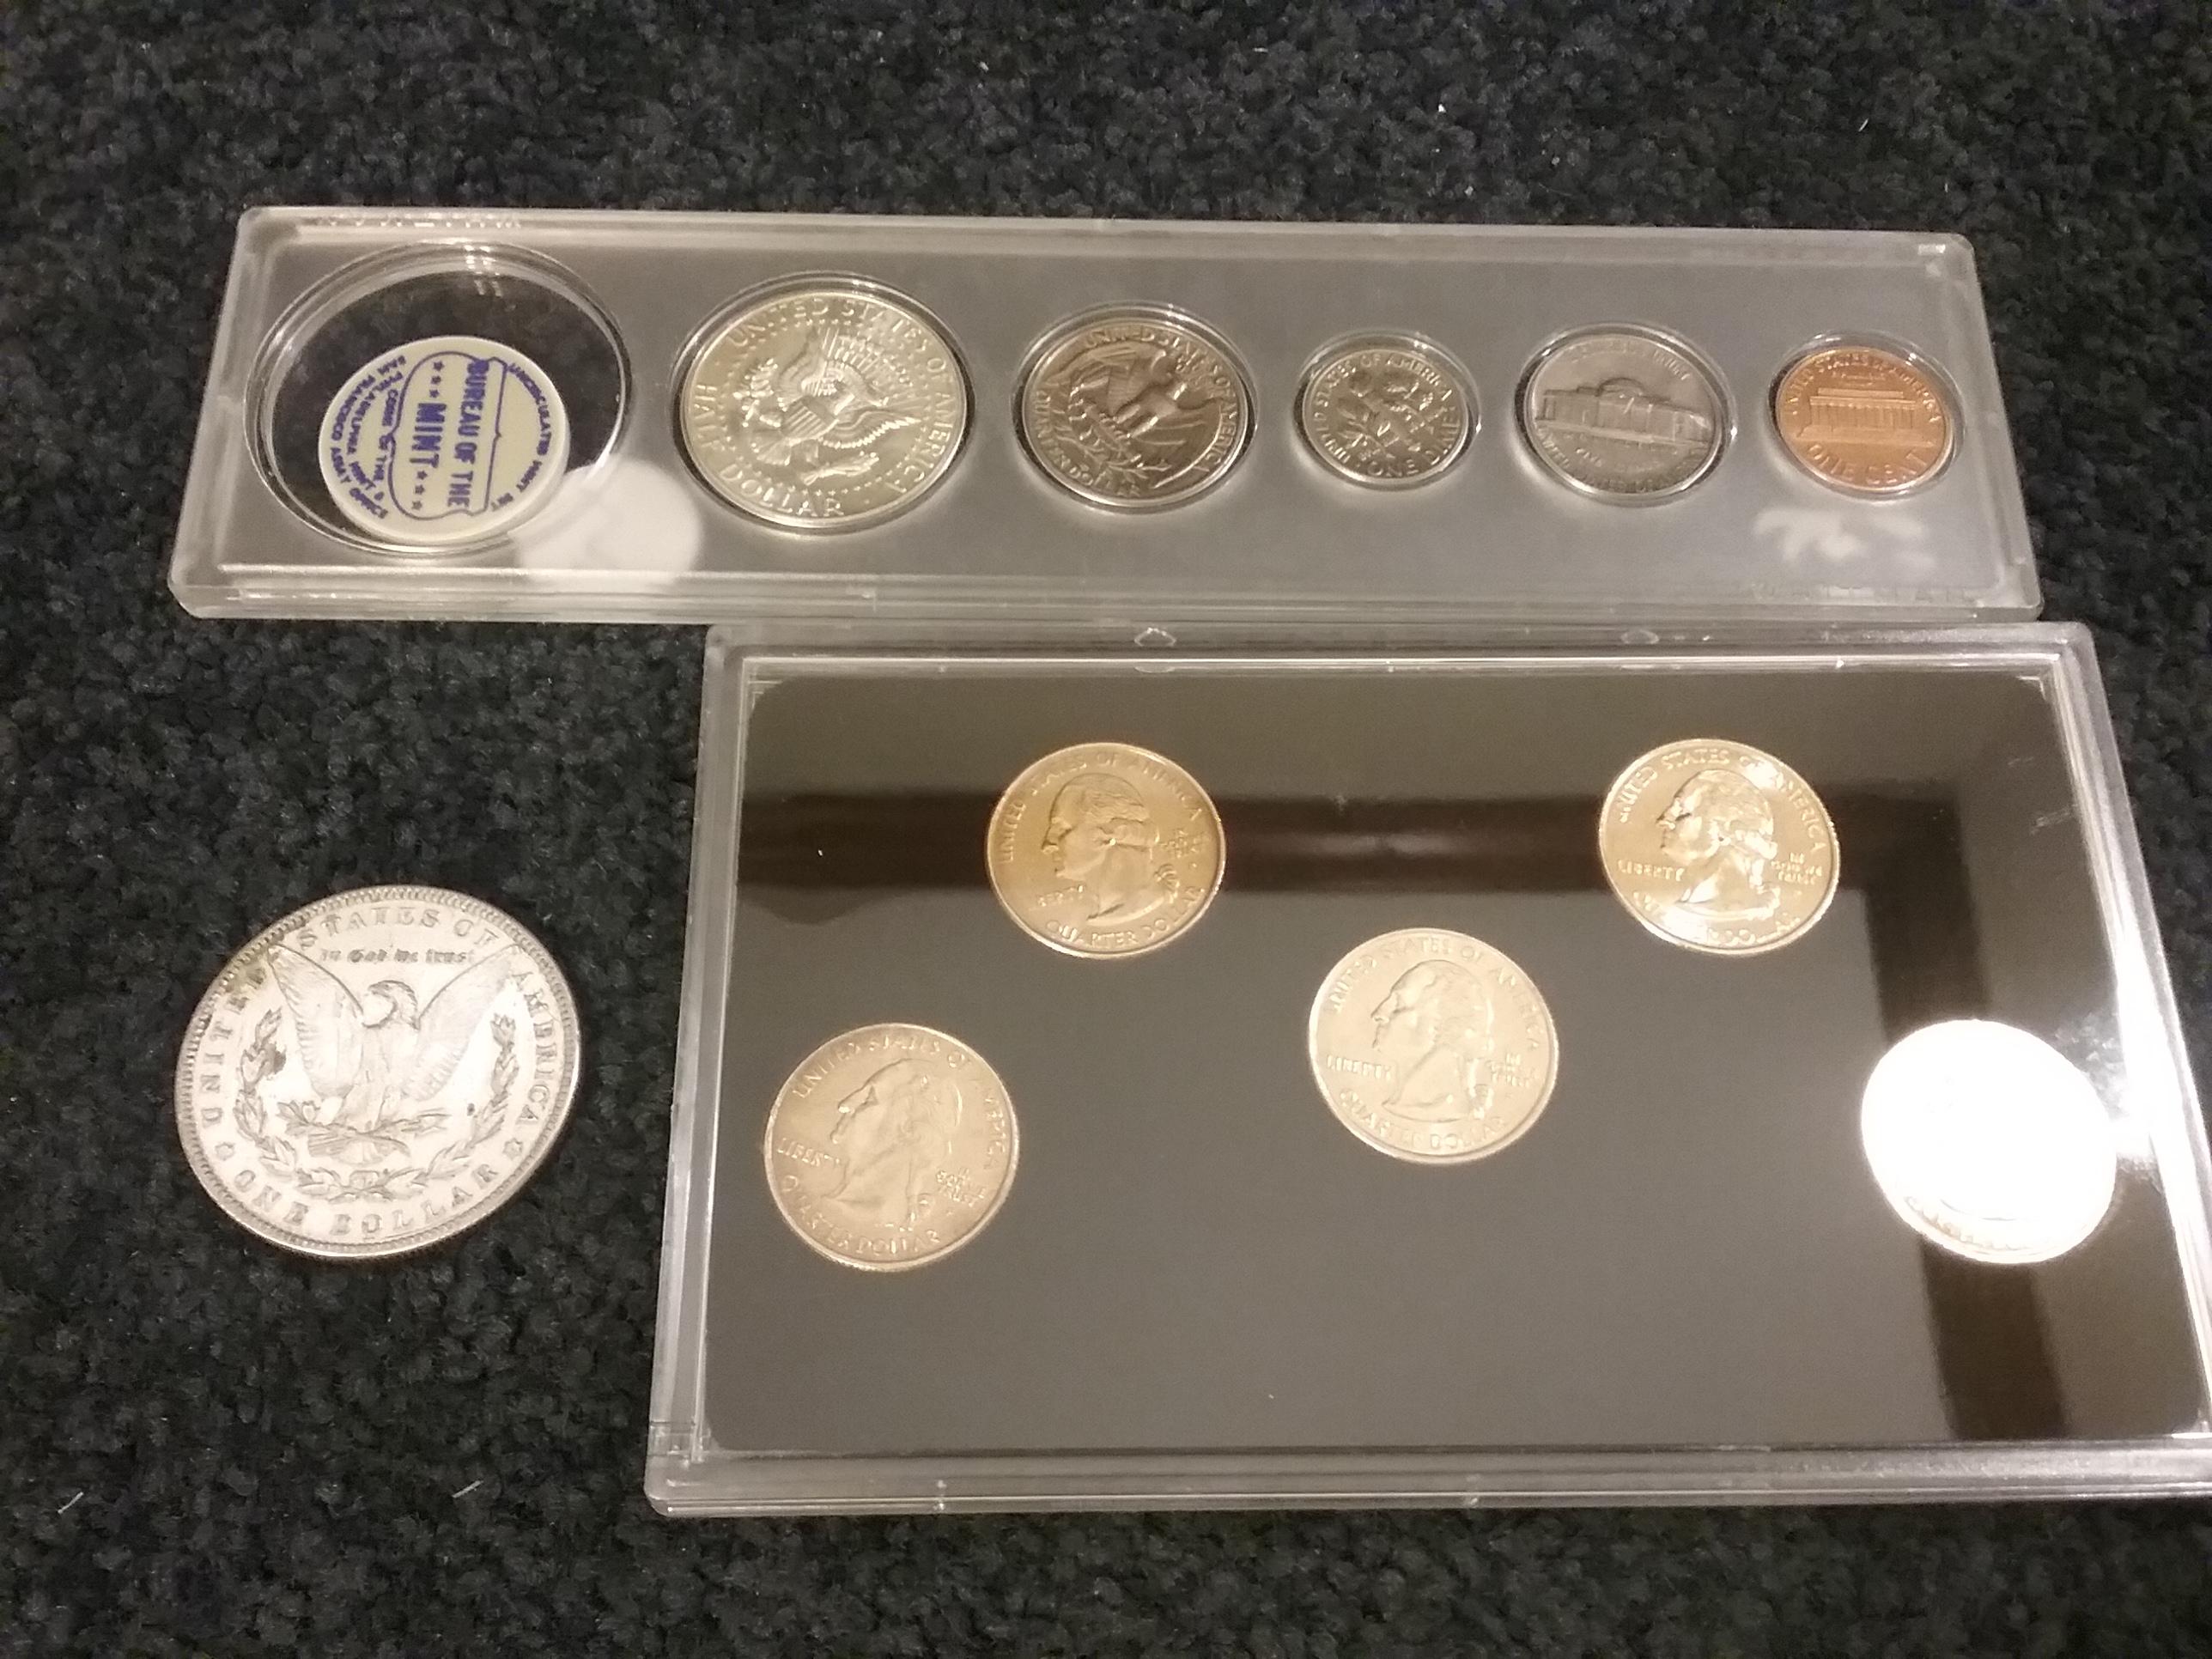 1968 Uncirculated Mint Set, 2007 Gold edition State quarter set and…..